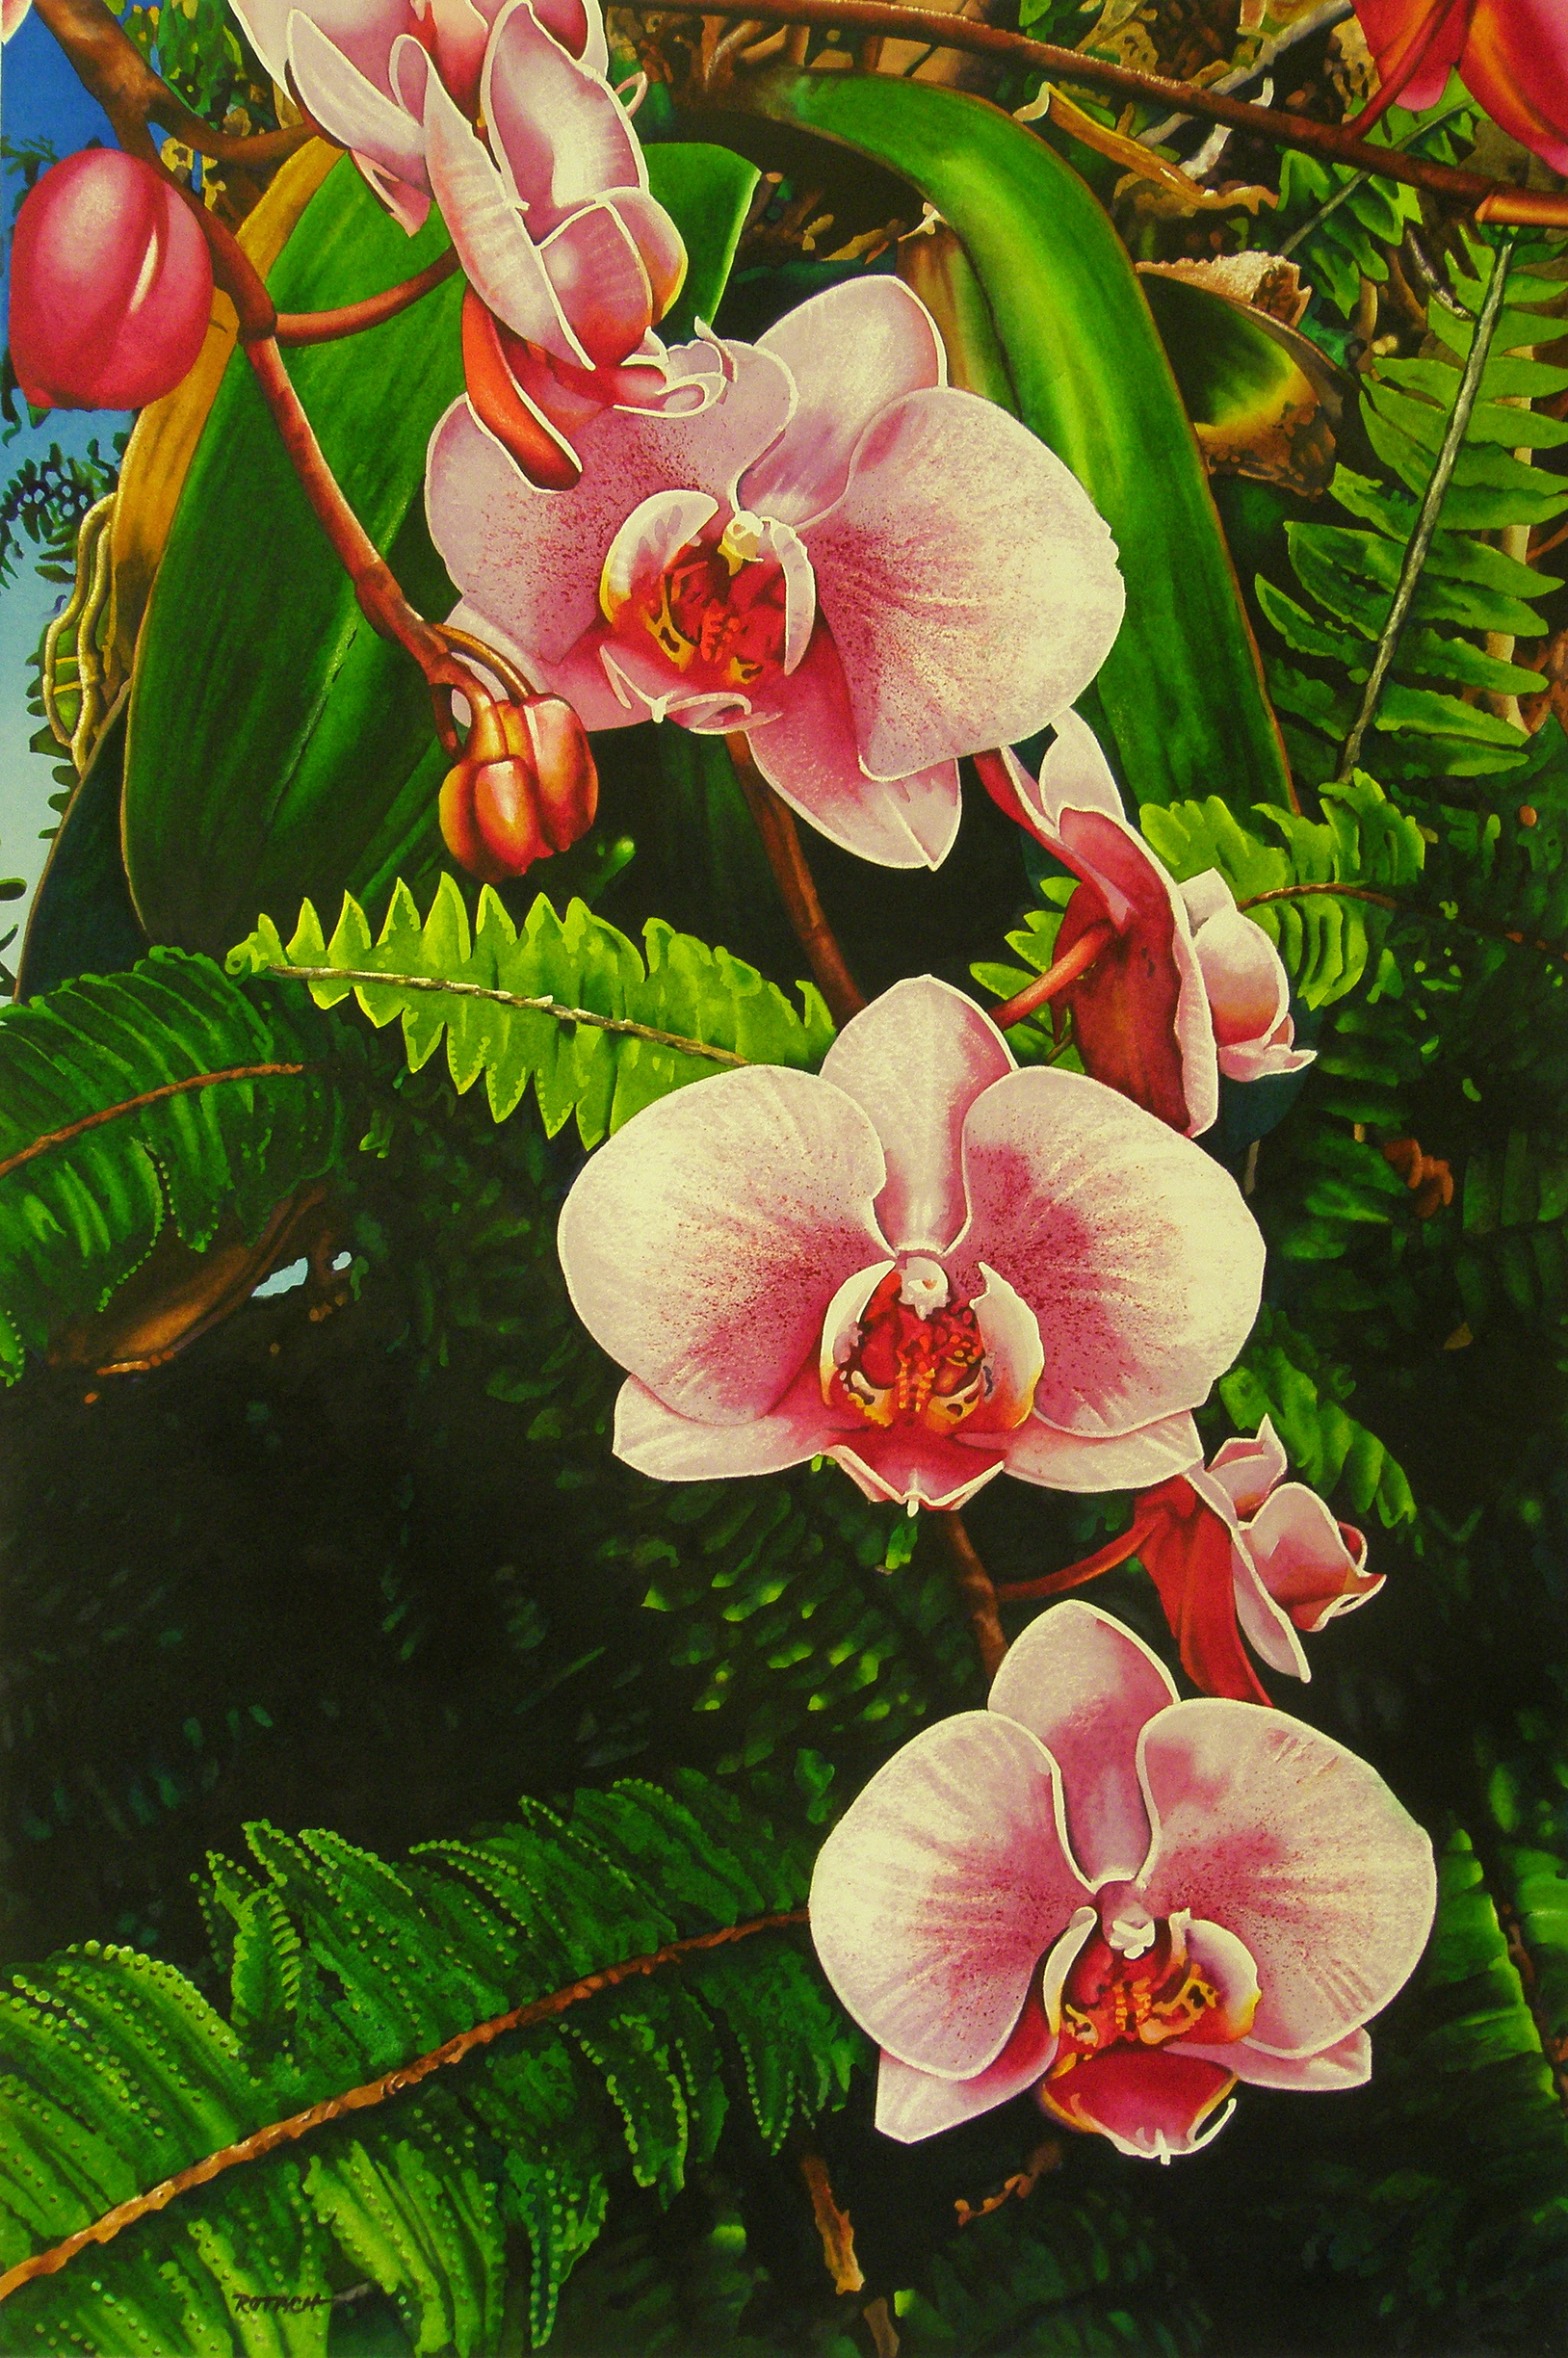 Orchids_in_Afterglow.JPG - Marlin  Rotach  01